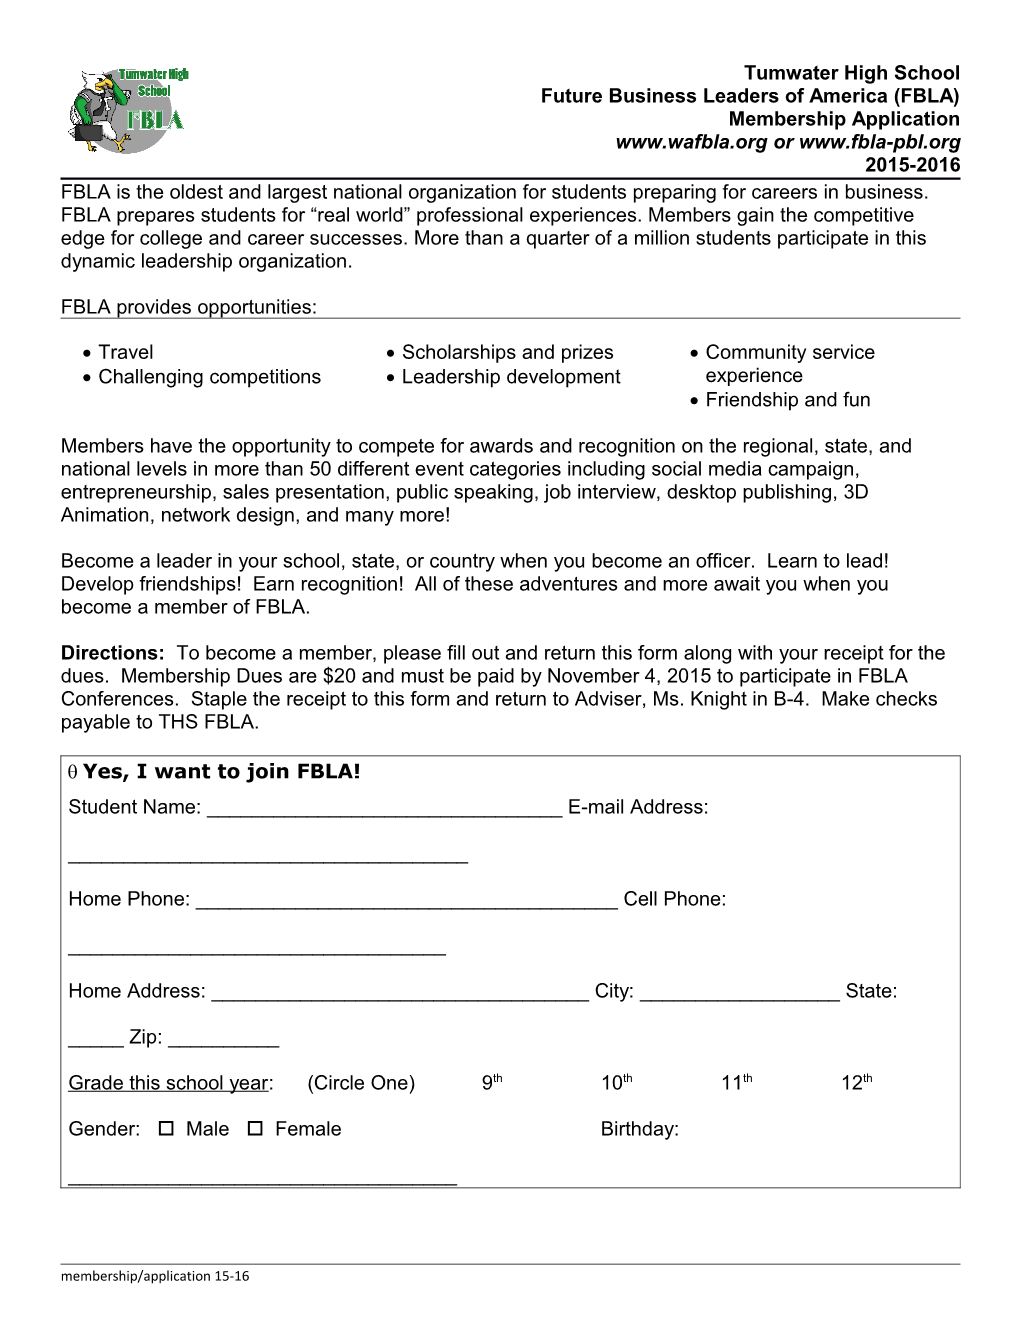 Fill out the Information Below